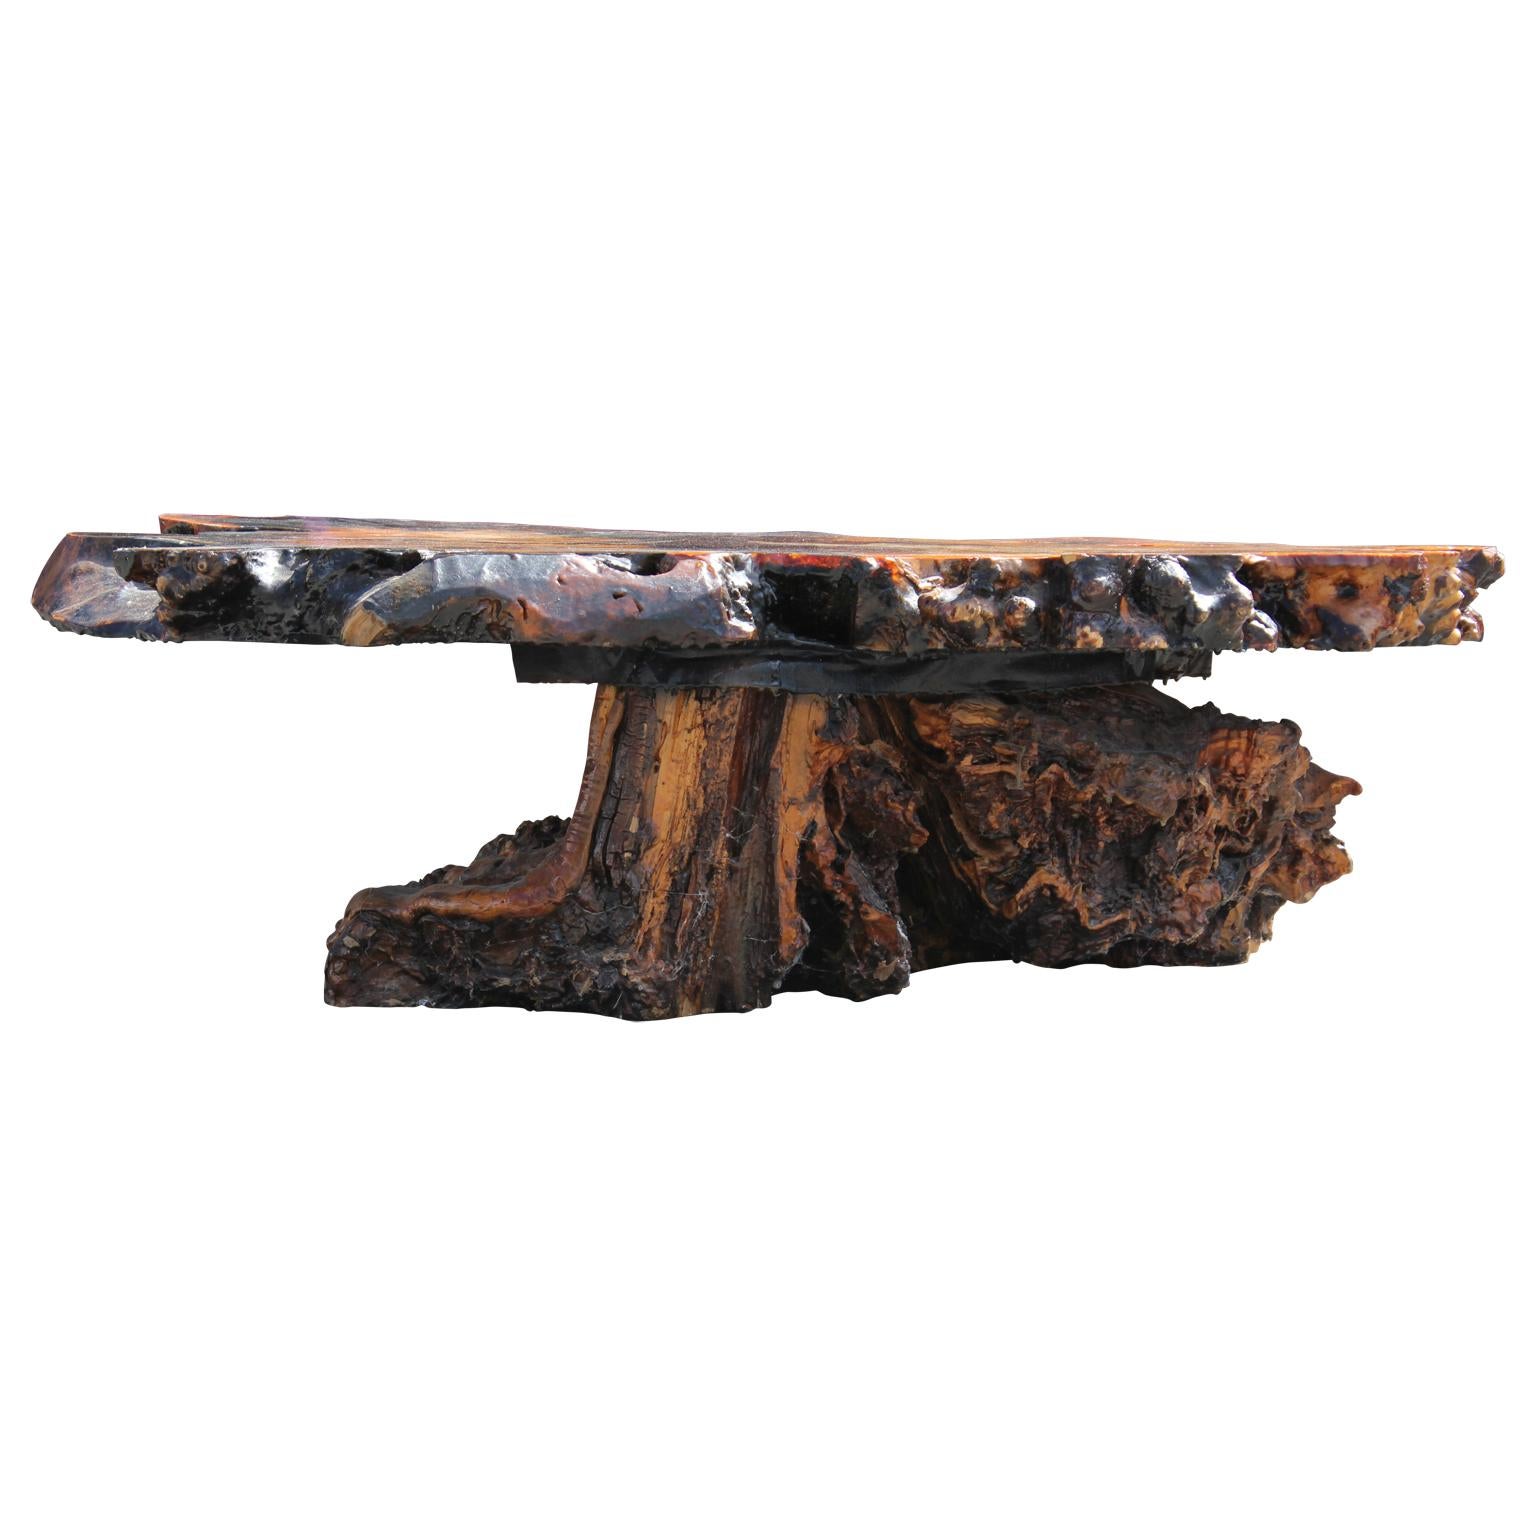 Mid-20th Century Modern Nakashima Style Burl Root Coffee Table with Inlayed Amber Glass Detailing